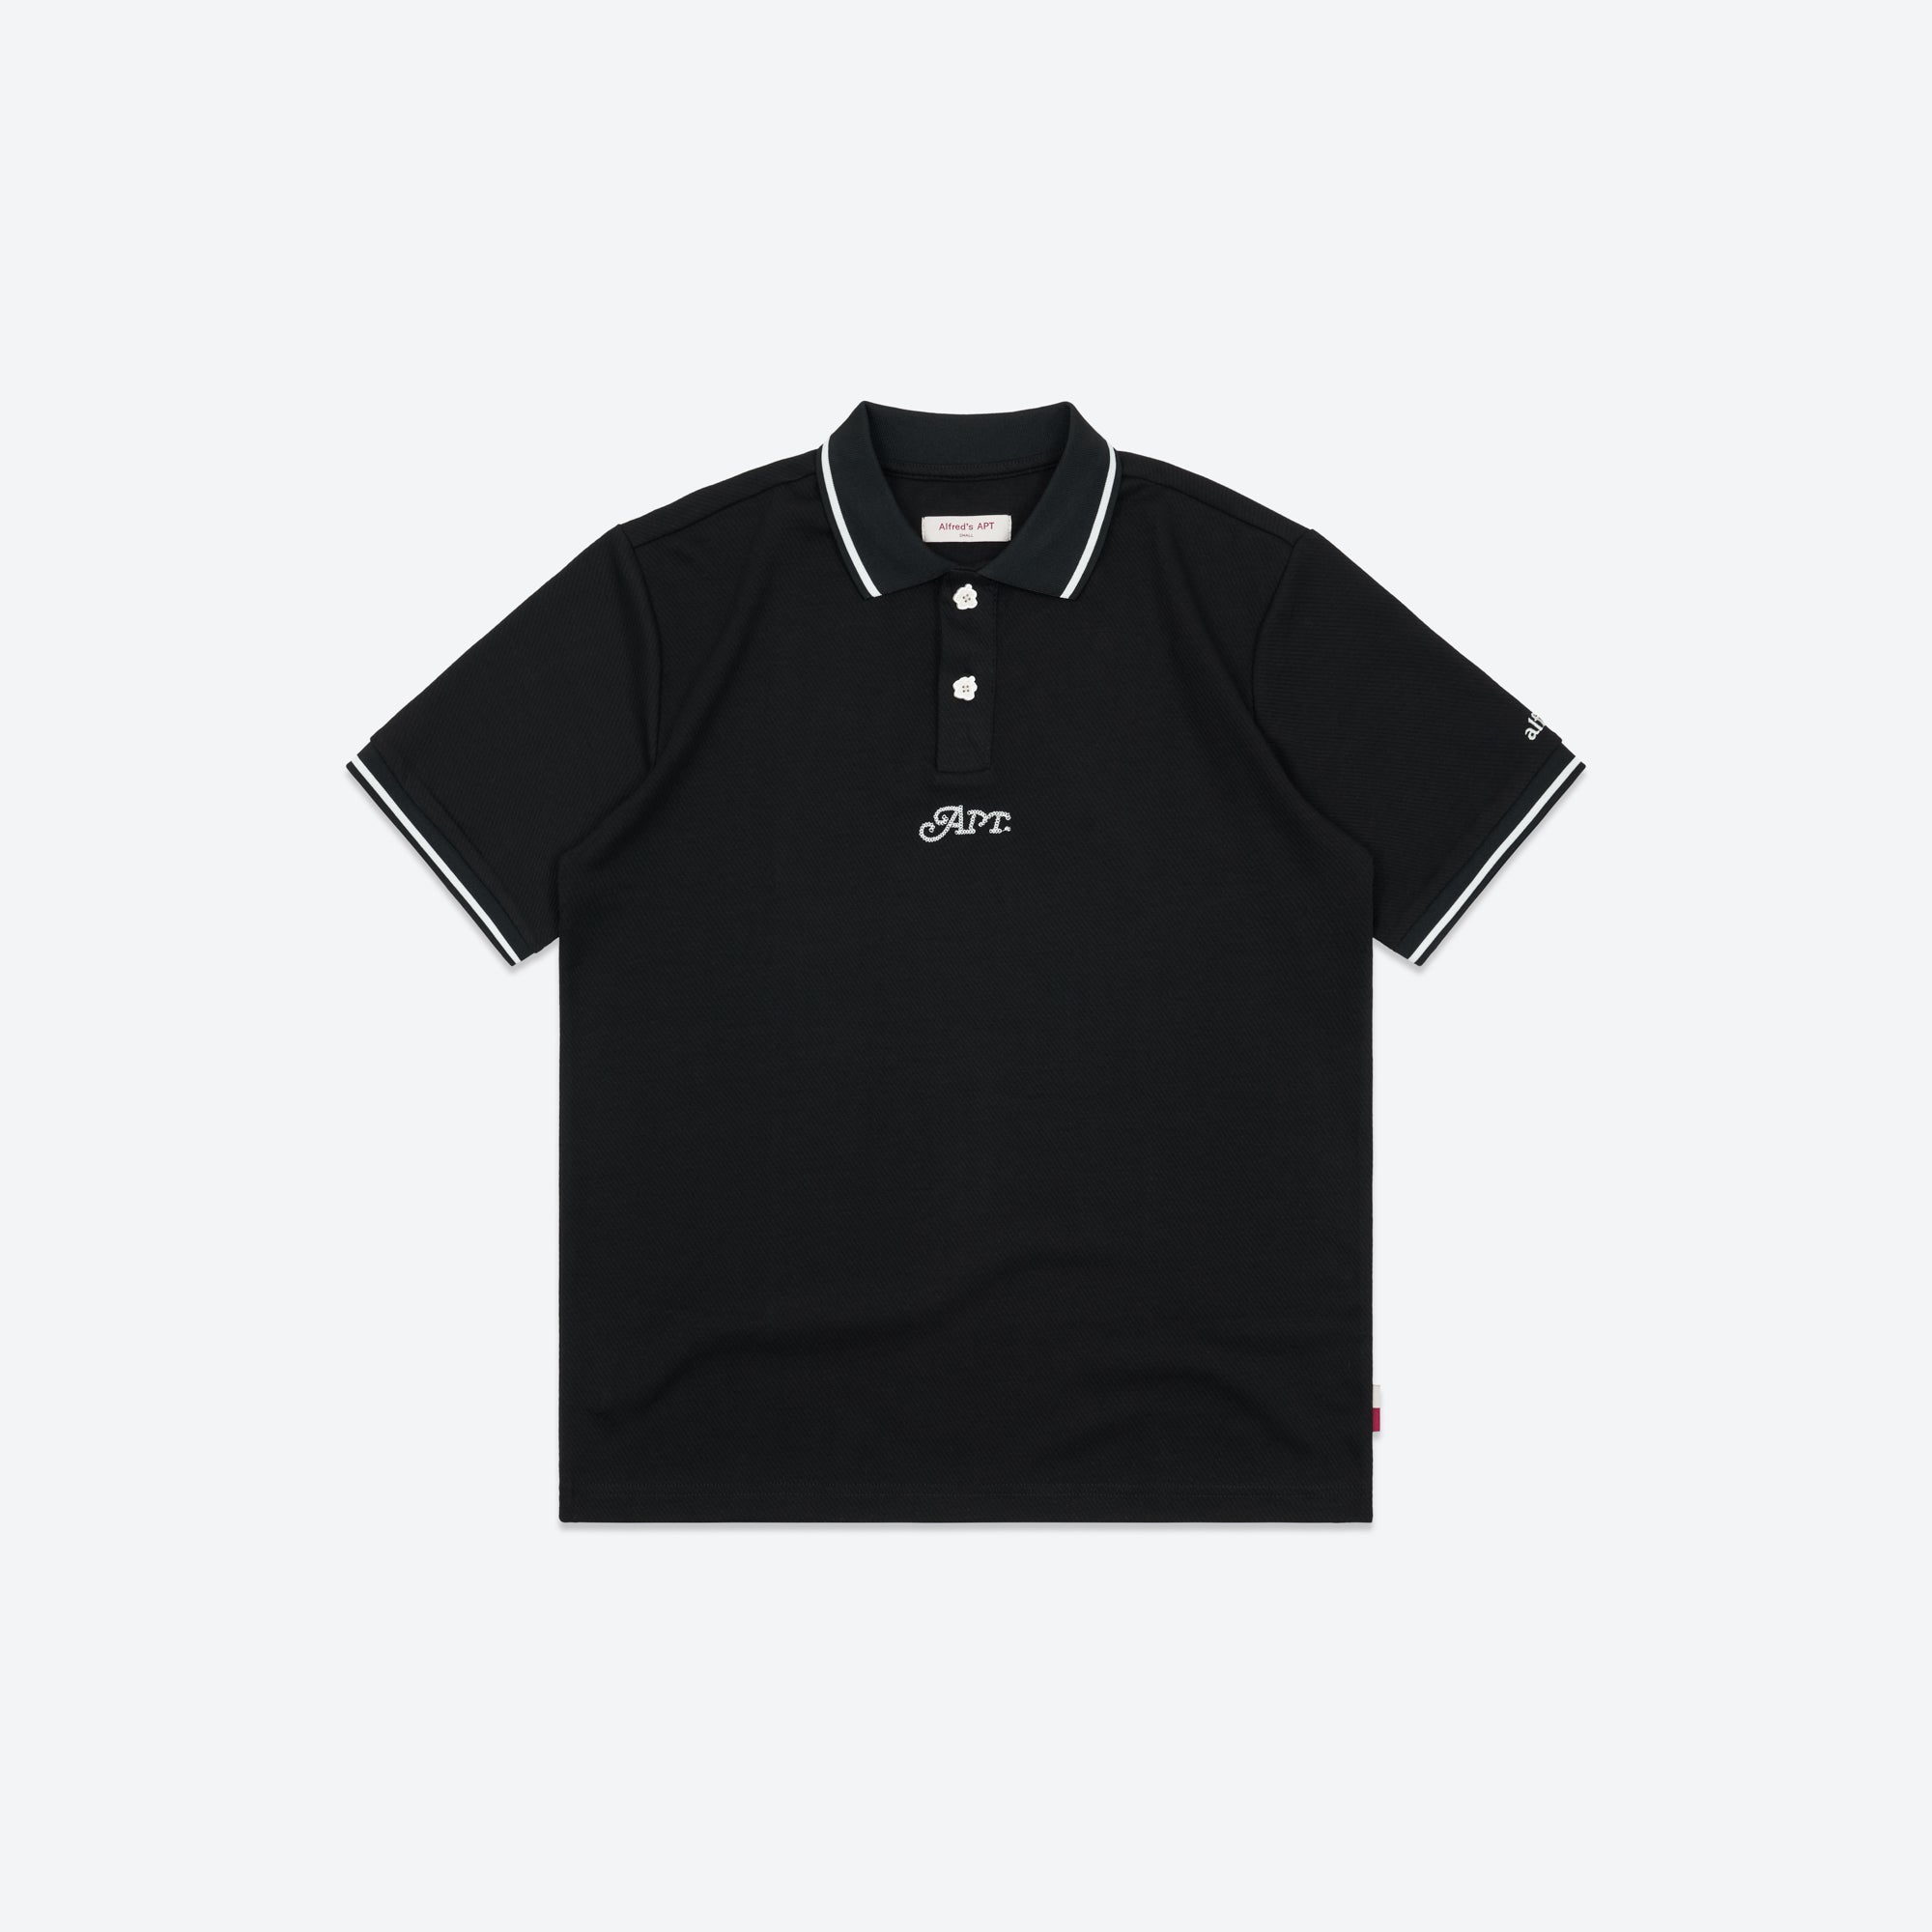 Alfred's Apartment - Apartment Polo - Black